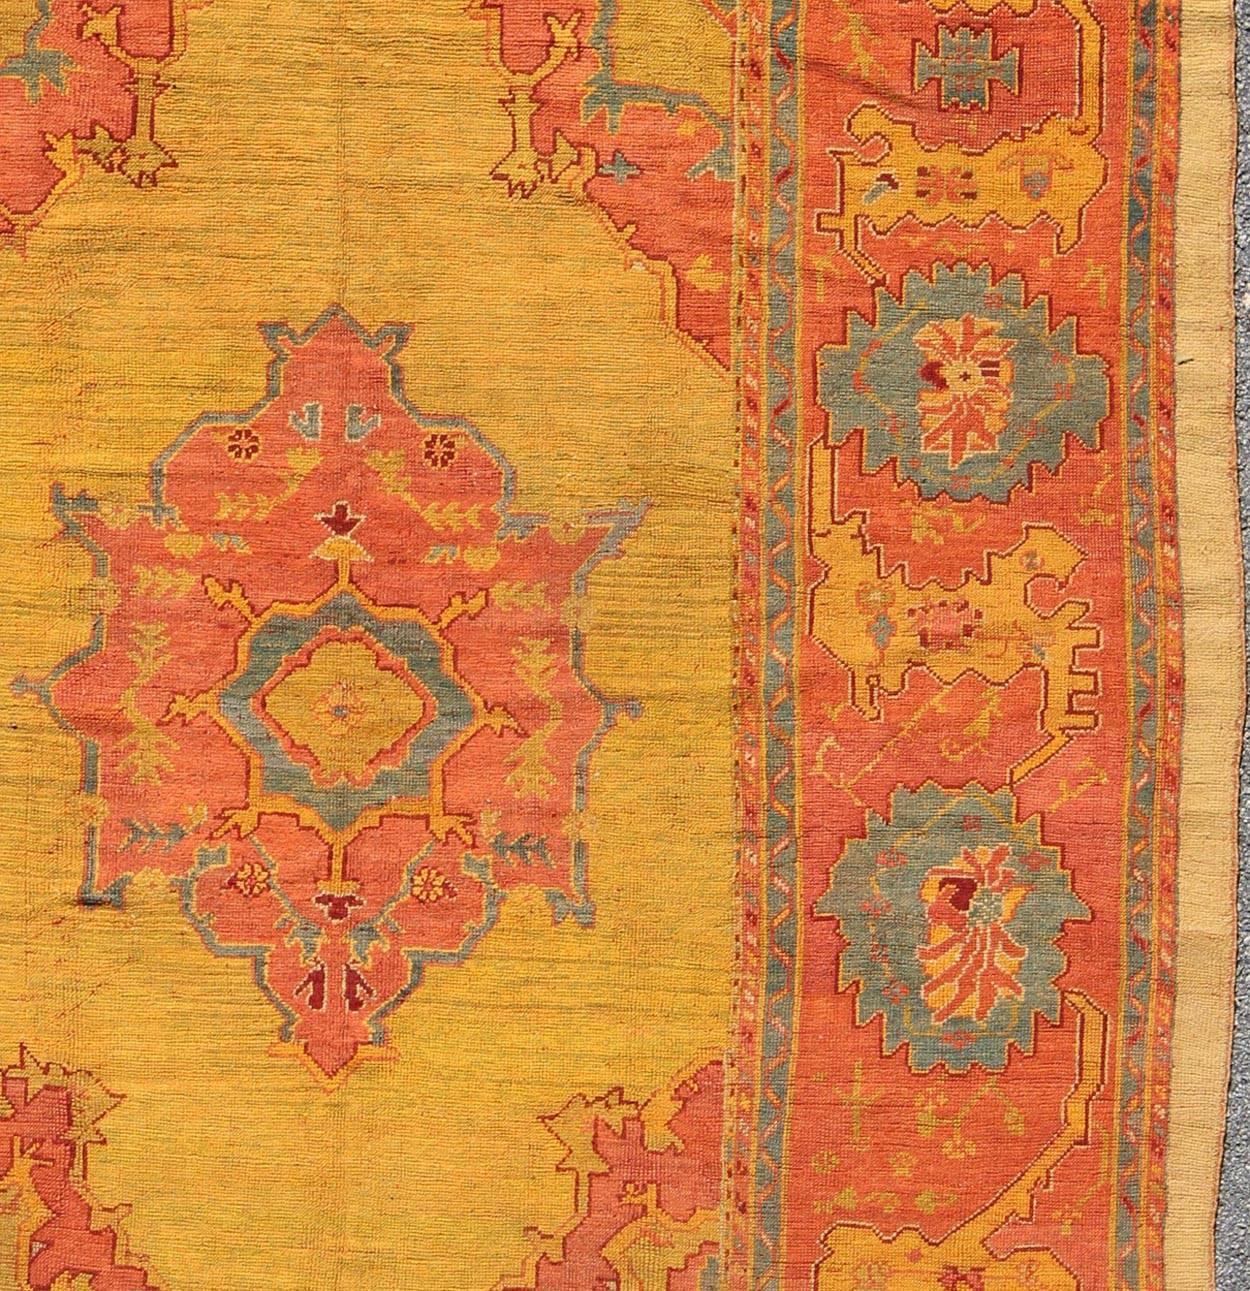 Early 20th Century Antique Turkish Oushak Rug in  Saturated Gold, Orange Colors and Blue Accent 